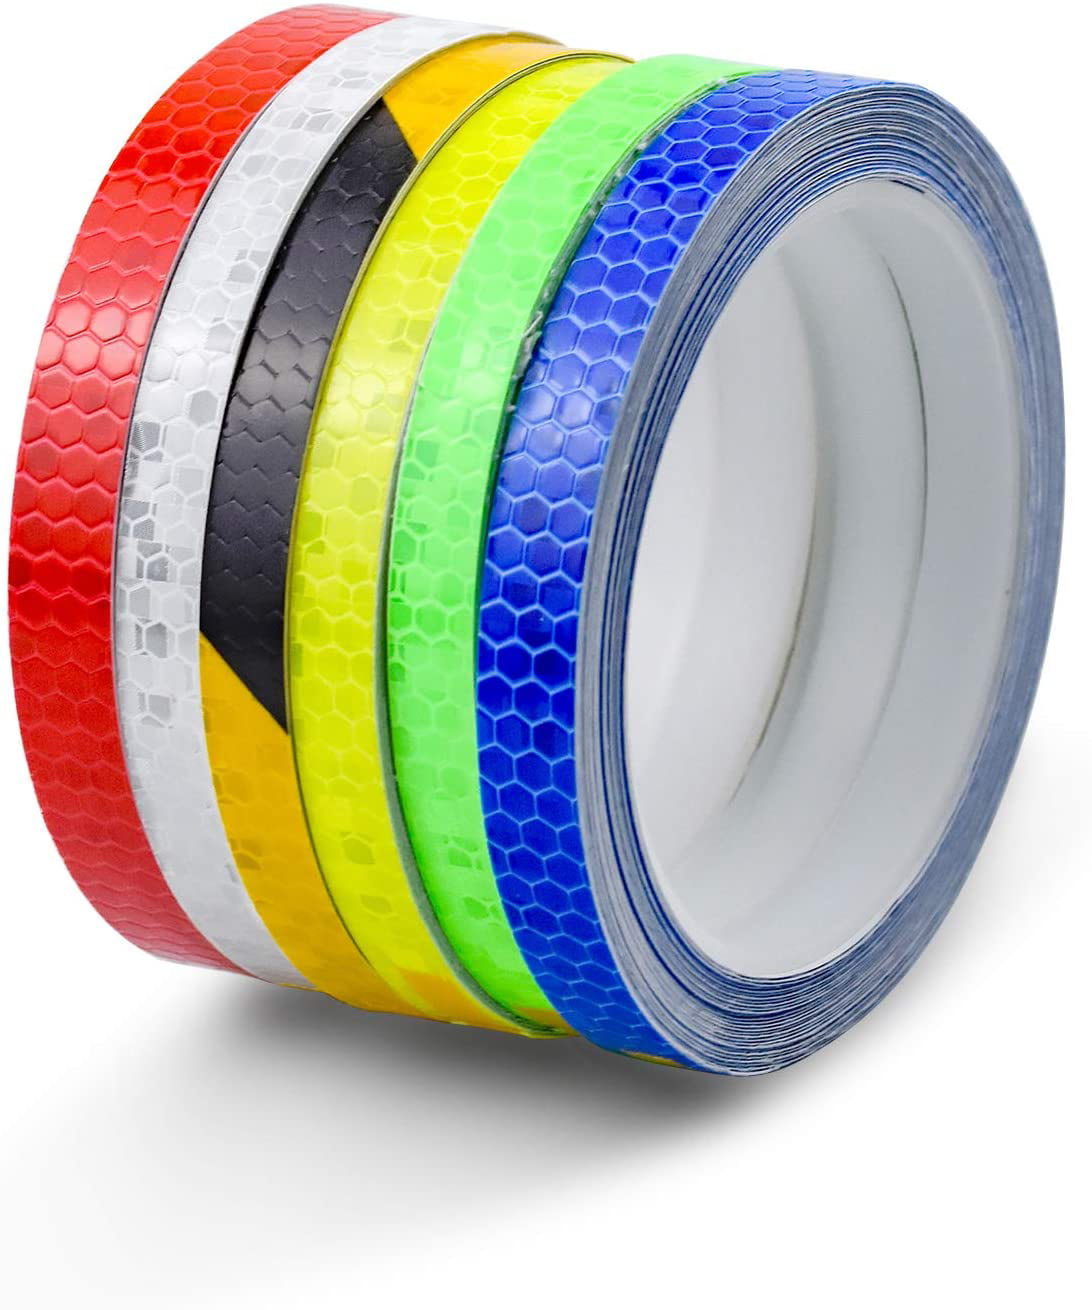 Reflective Tape 8M Safety Stickers Hi Vis Safety Warning Self-Adhesive Reflector 